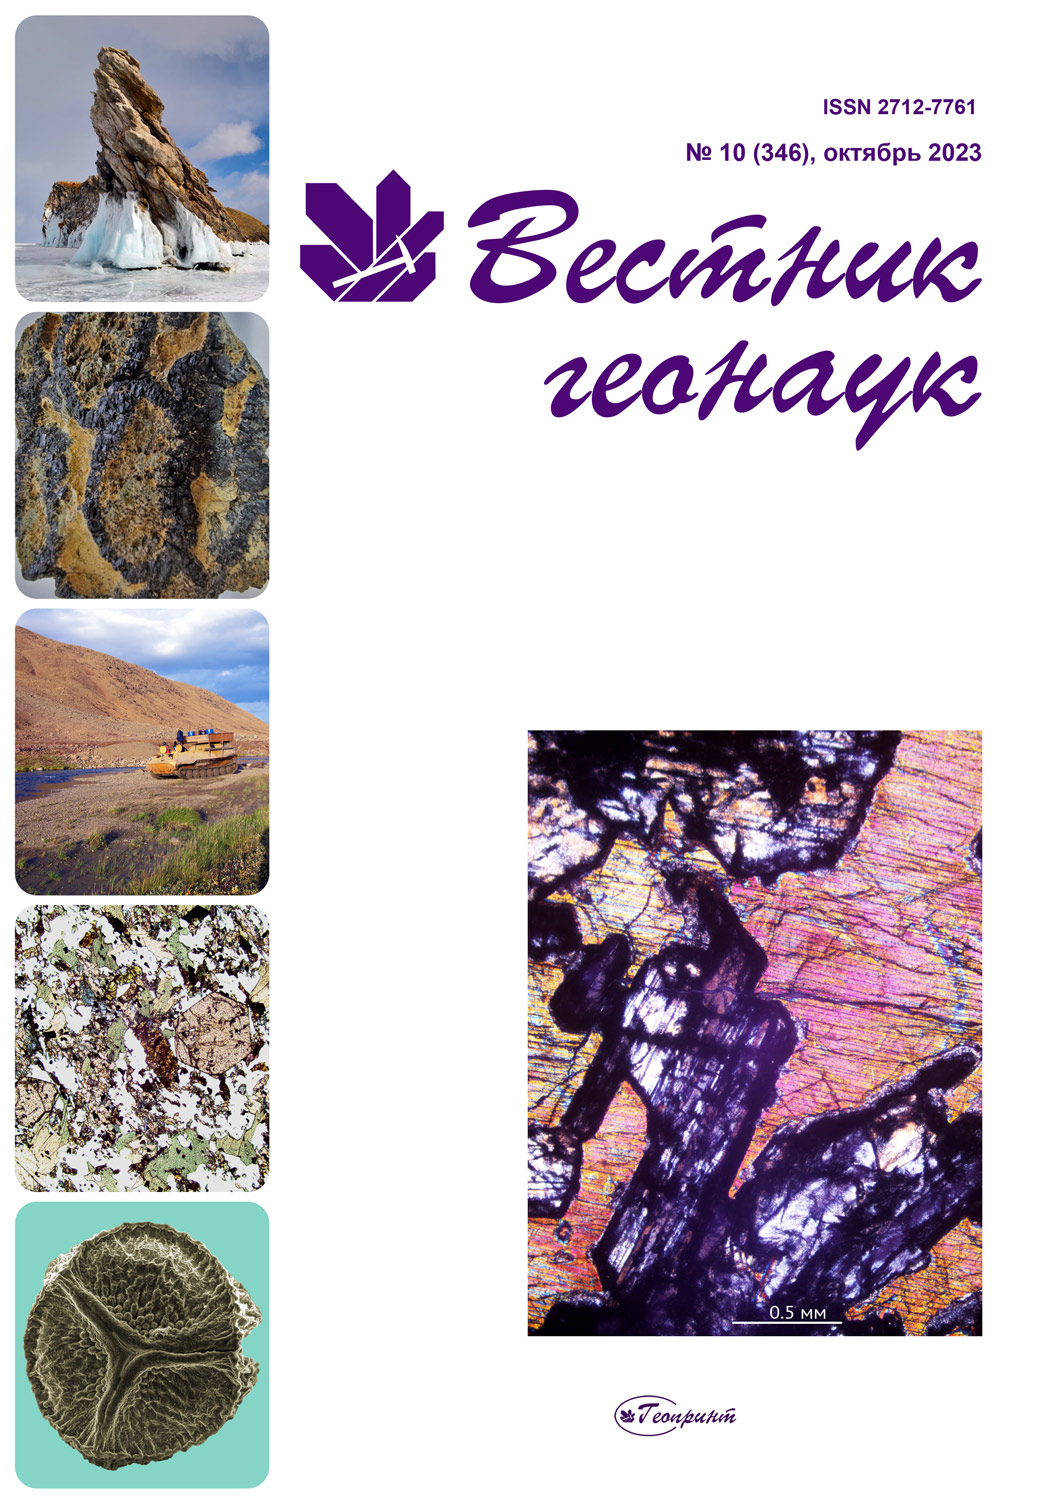                         The 15th International Congress for Applied Mineralogy: a hard way from Belgorod to Chengdu
            